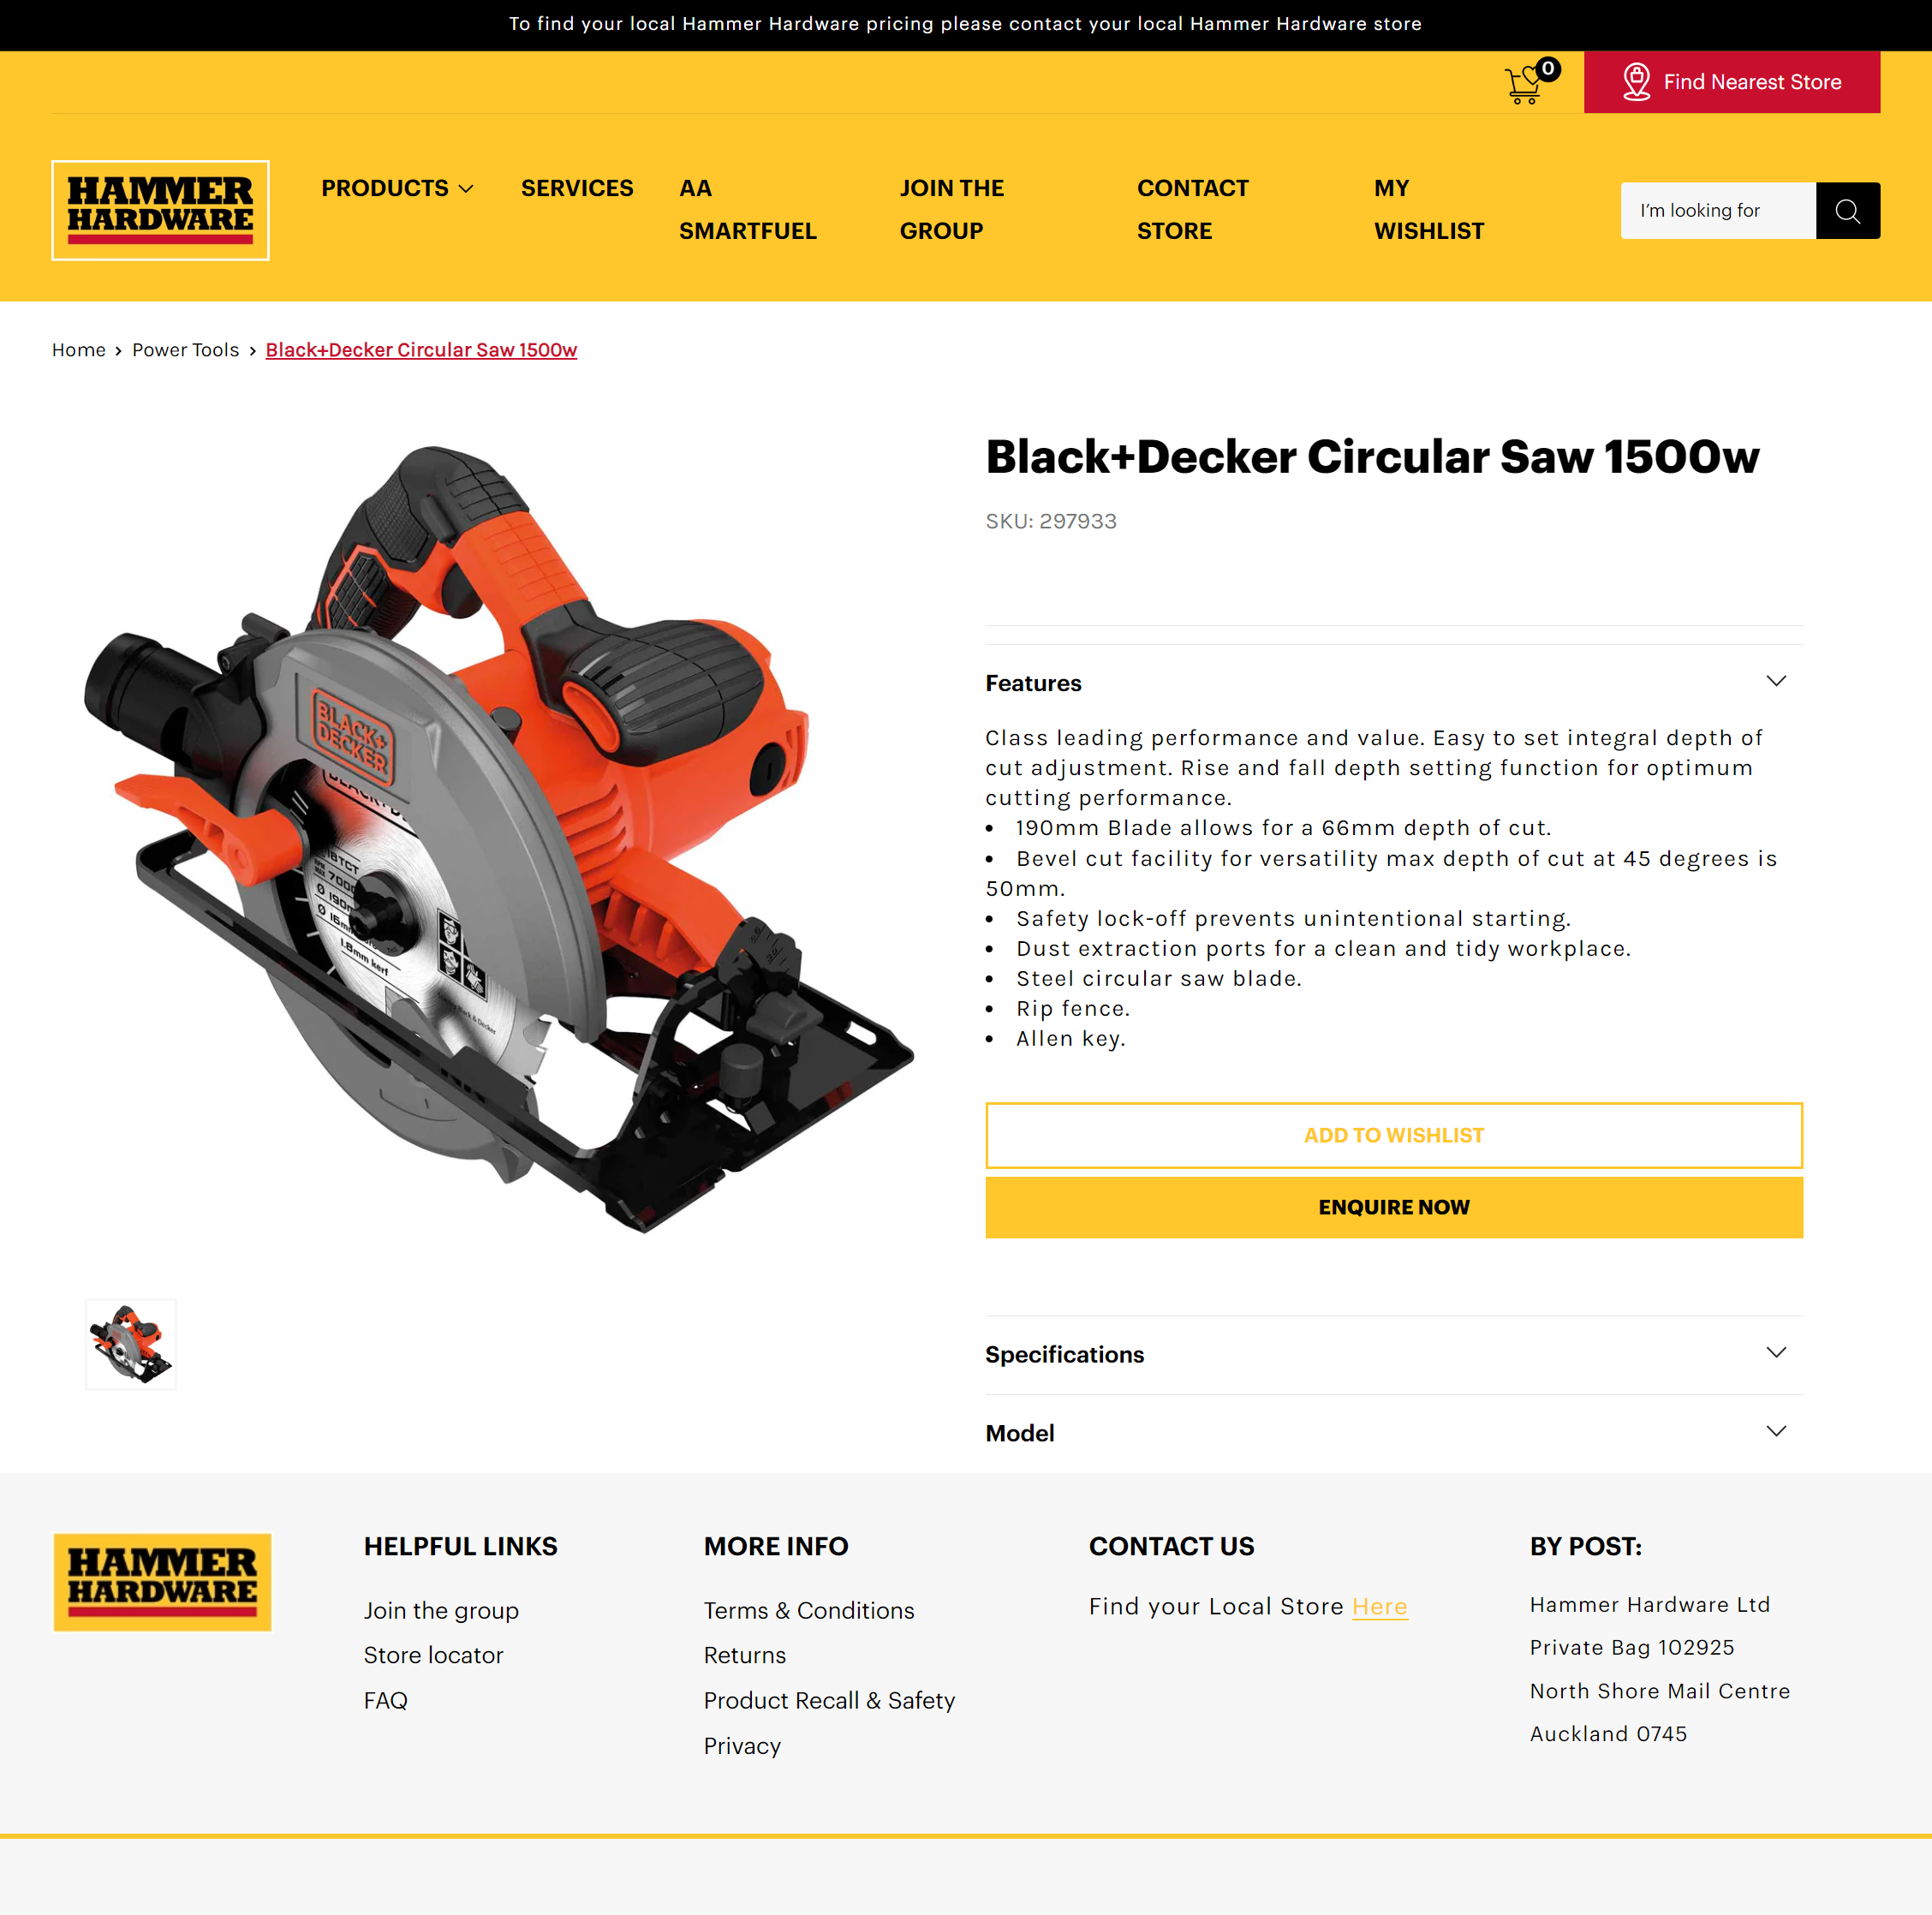 Hammer Hardware Product Page